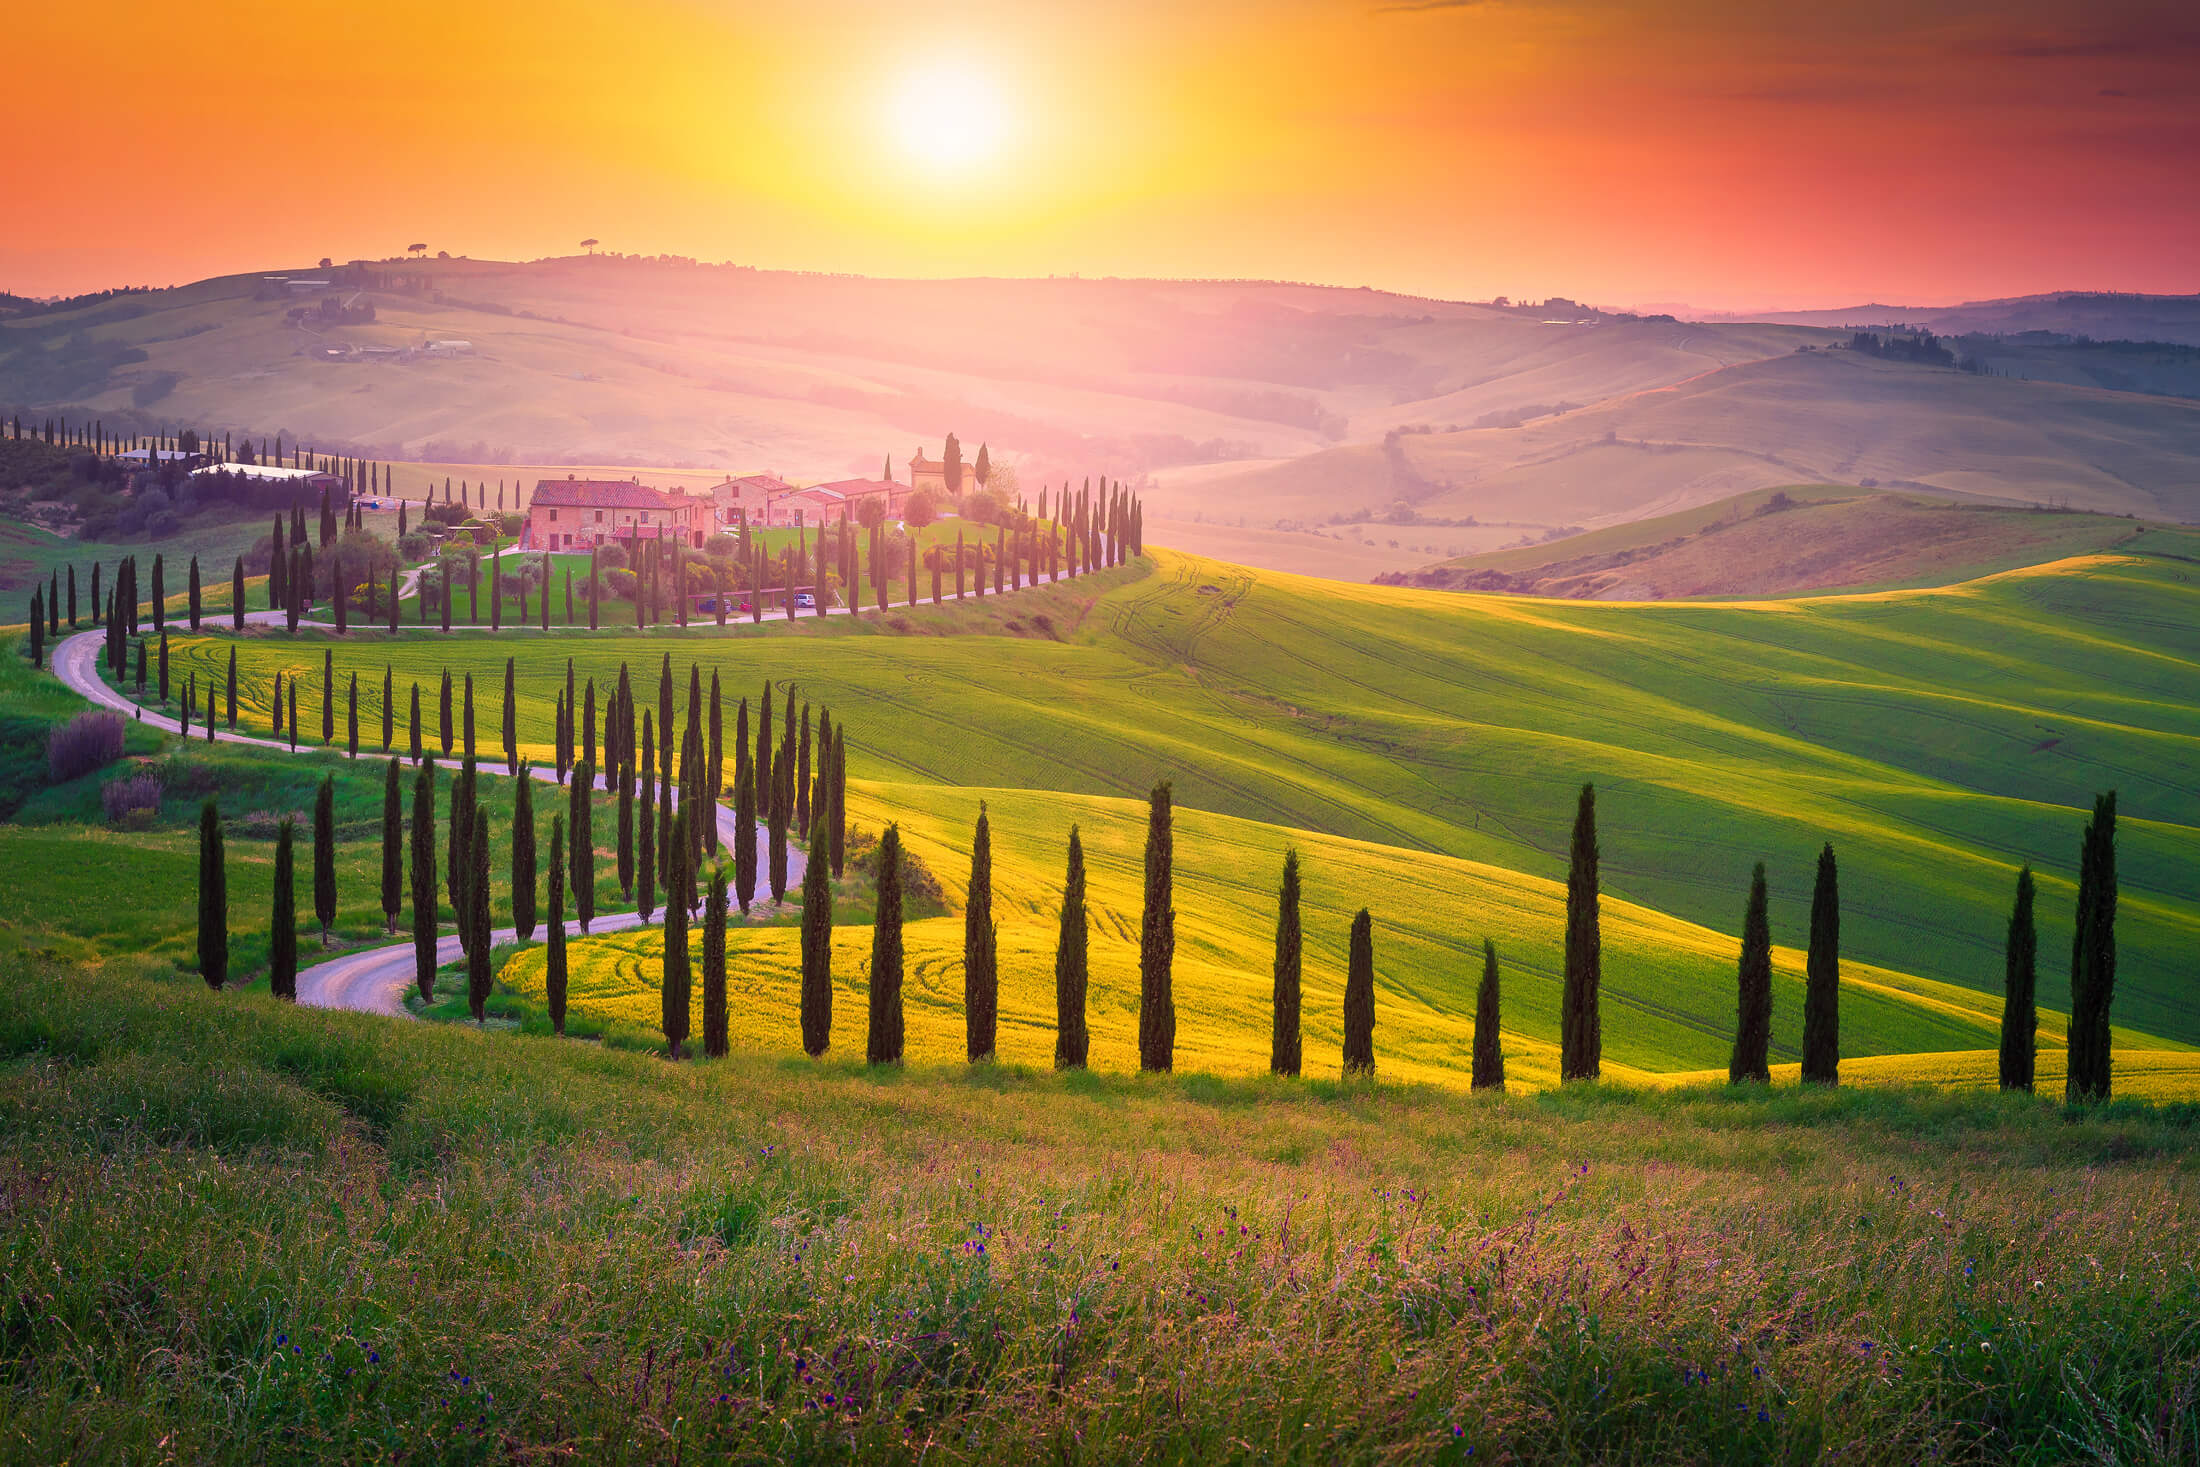 Sunset in Tuscany, Italy, with a road flanked by cypress trees